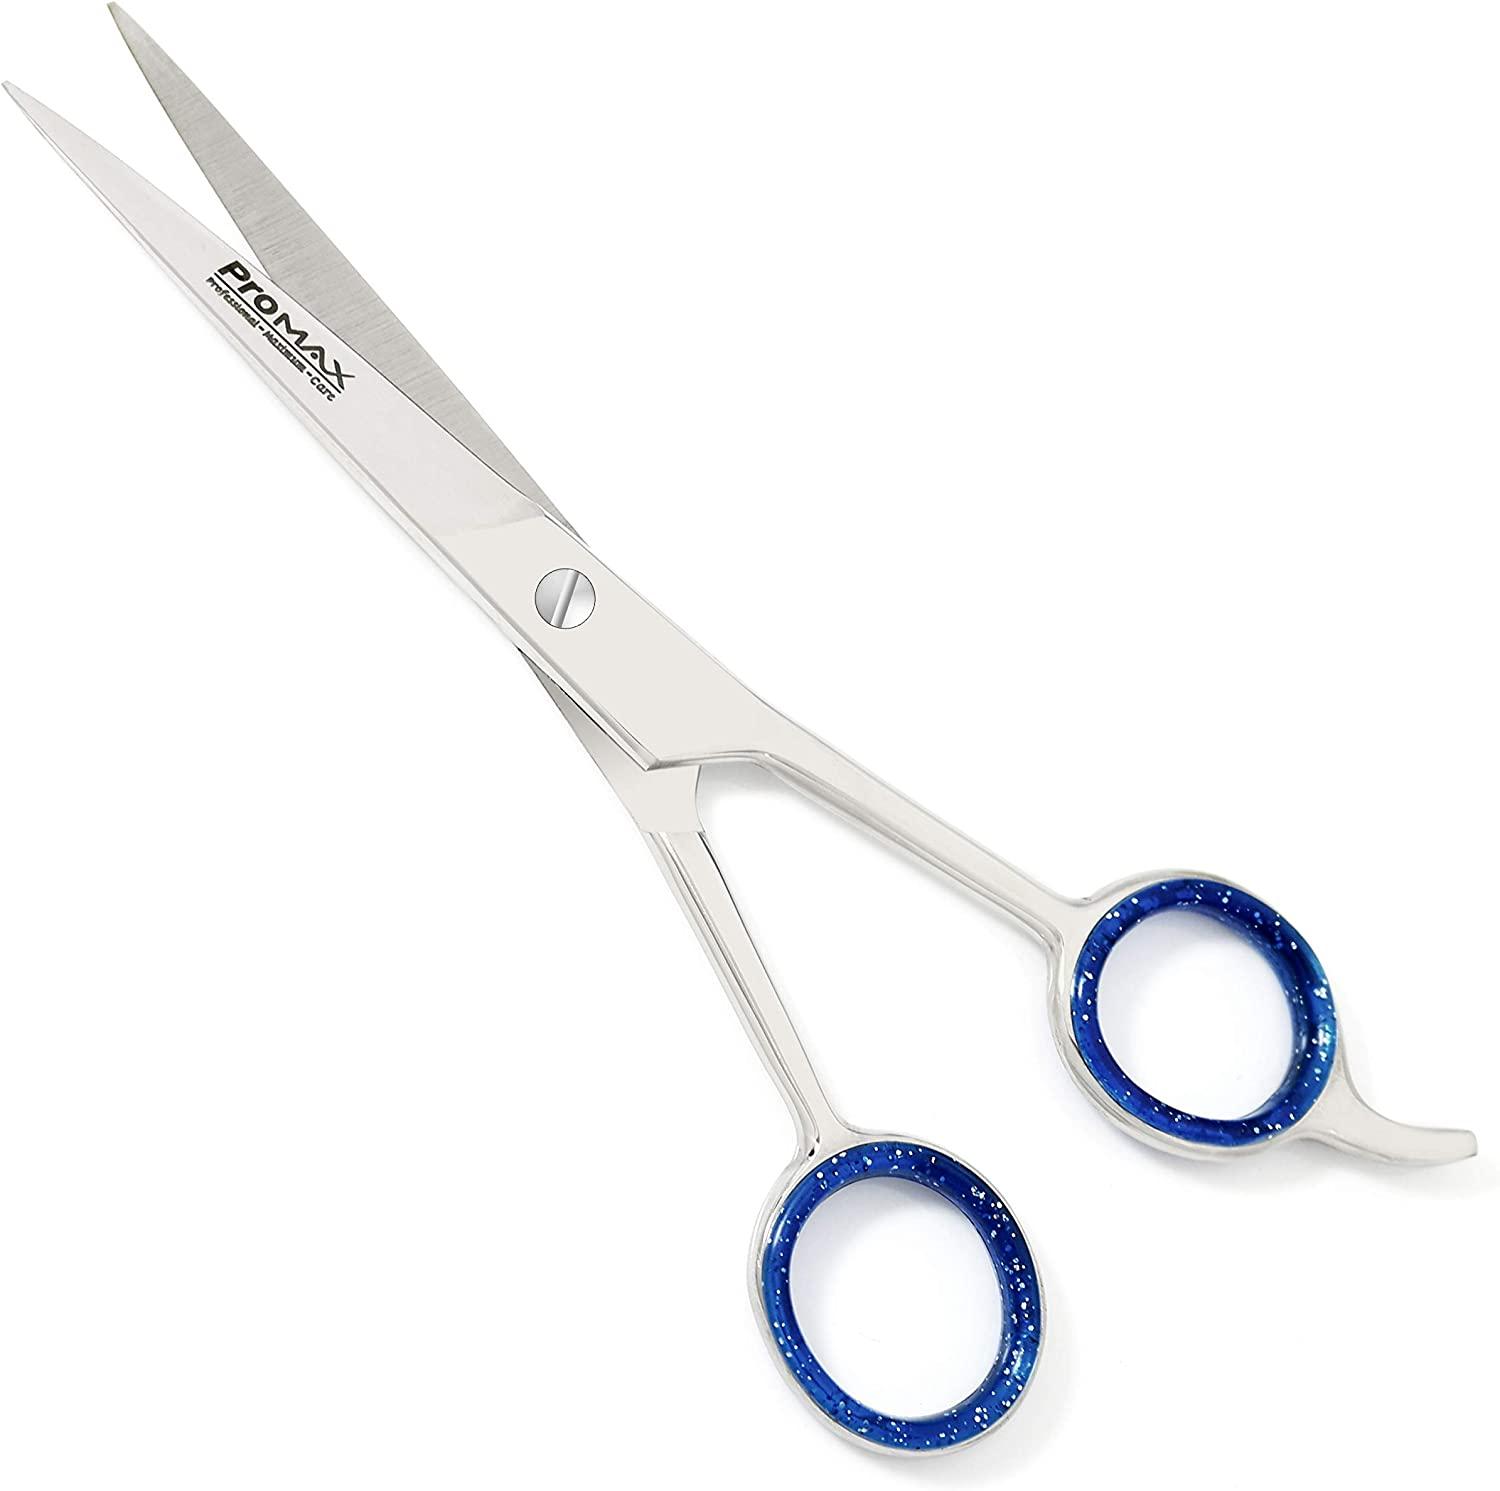 HB Professionals Hair Cutting And Hair Dressing Shears - 5.5 Inches -  Premium Stainless Steel Scissors - Razor Edge Sharp Blades - For Salons